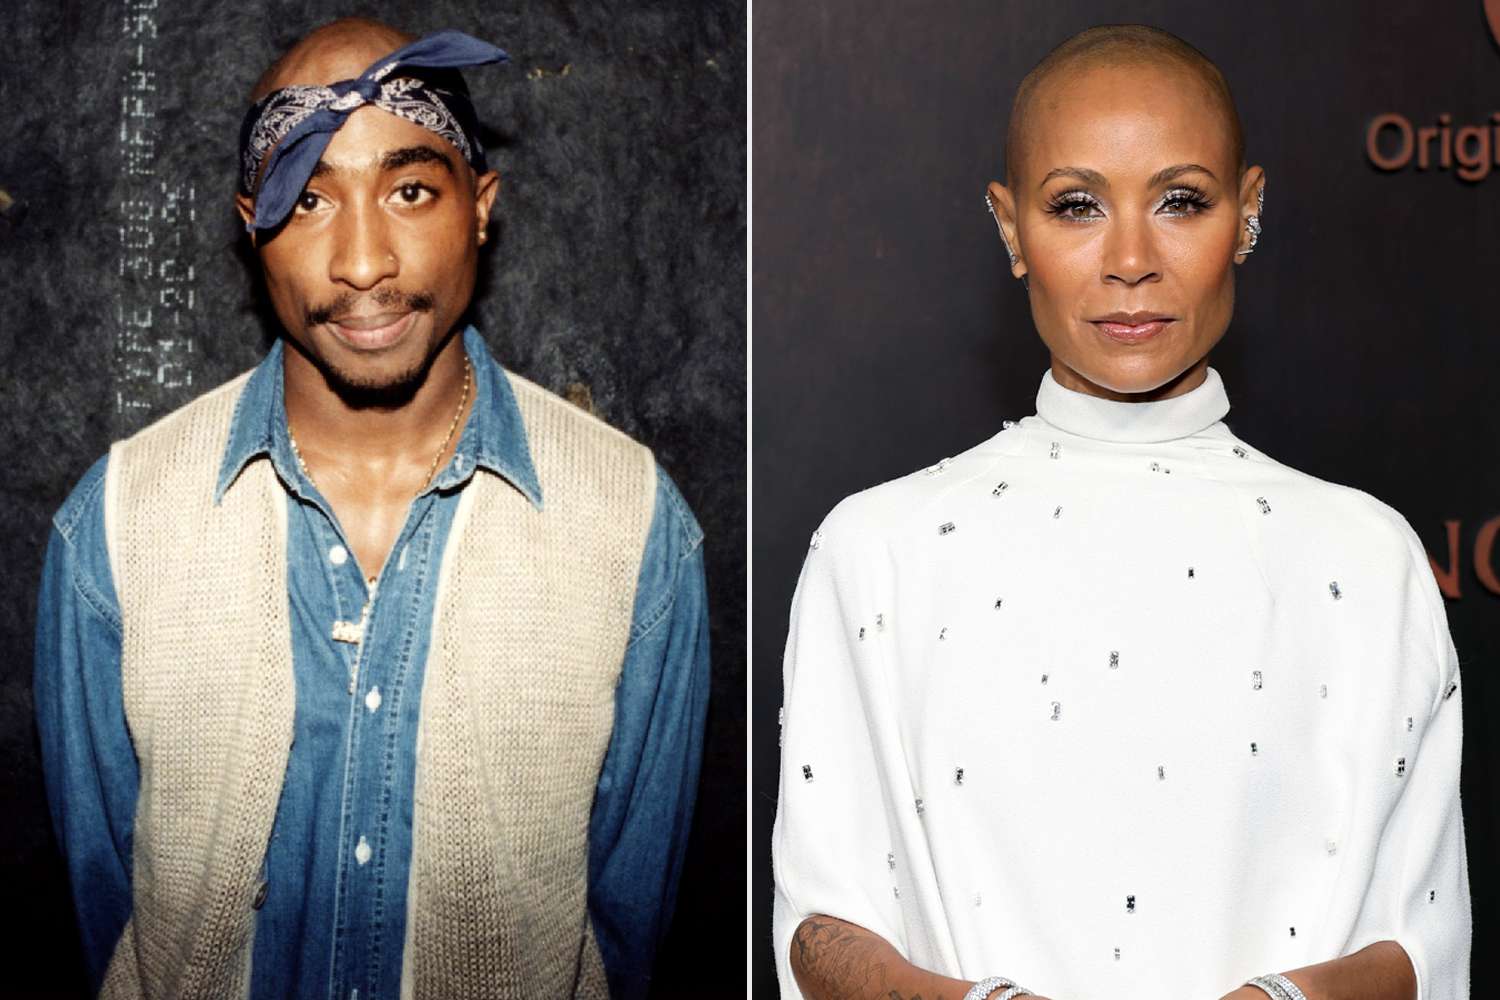 jada-pinkett-smith-reacts-to-arrest-in-tupac-murder-case-seeking-answers-and-closure